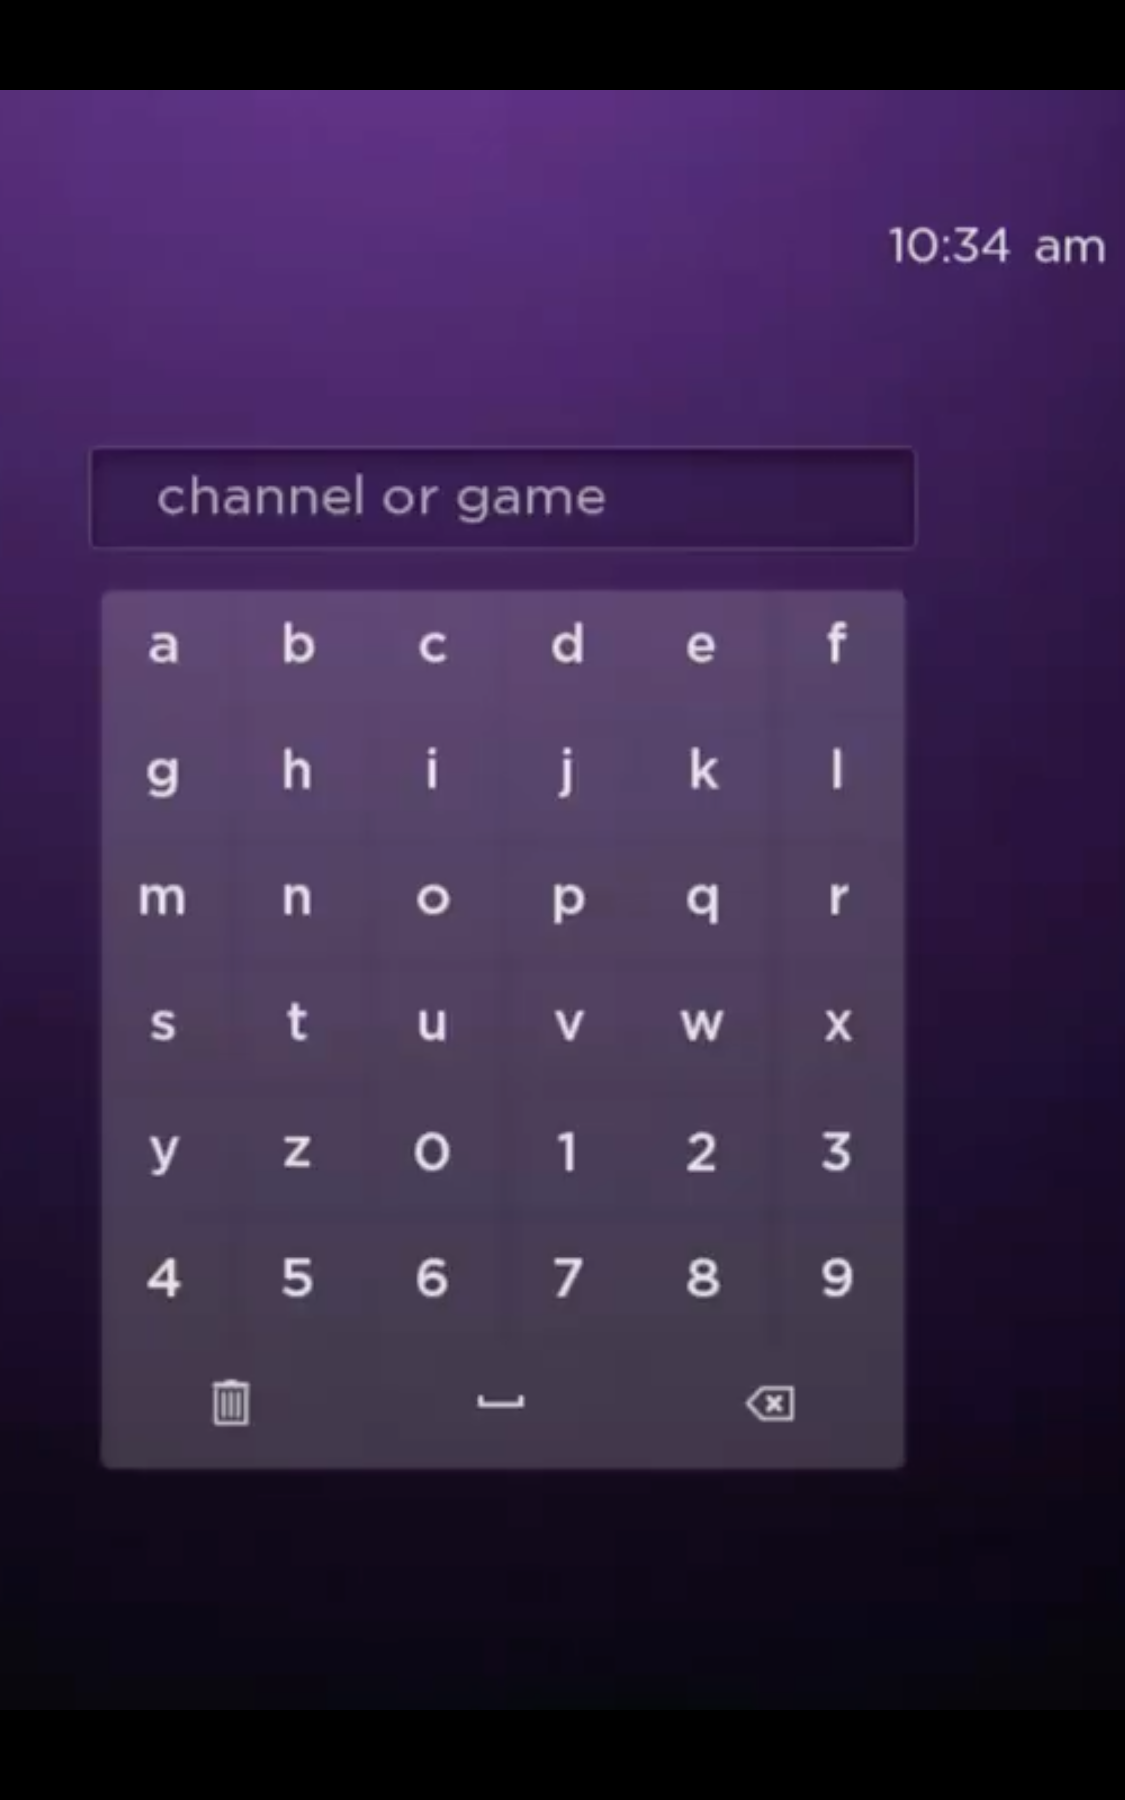 search for CBS on Roku from the keyboard.